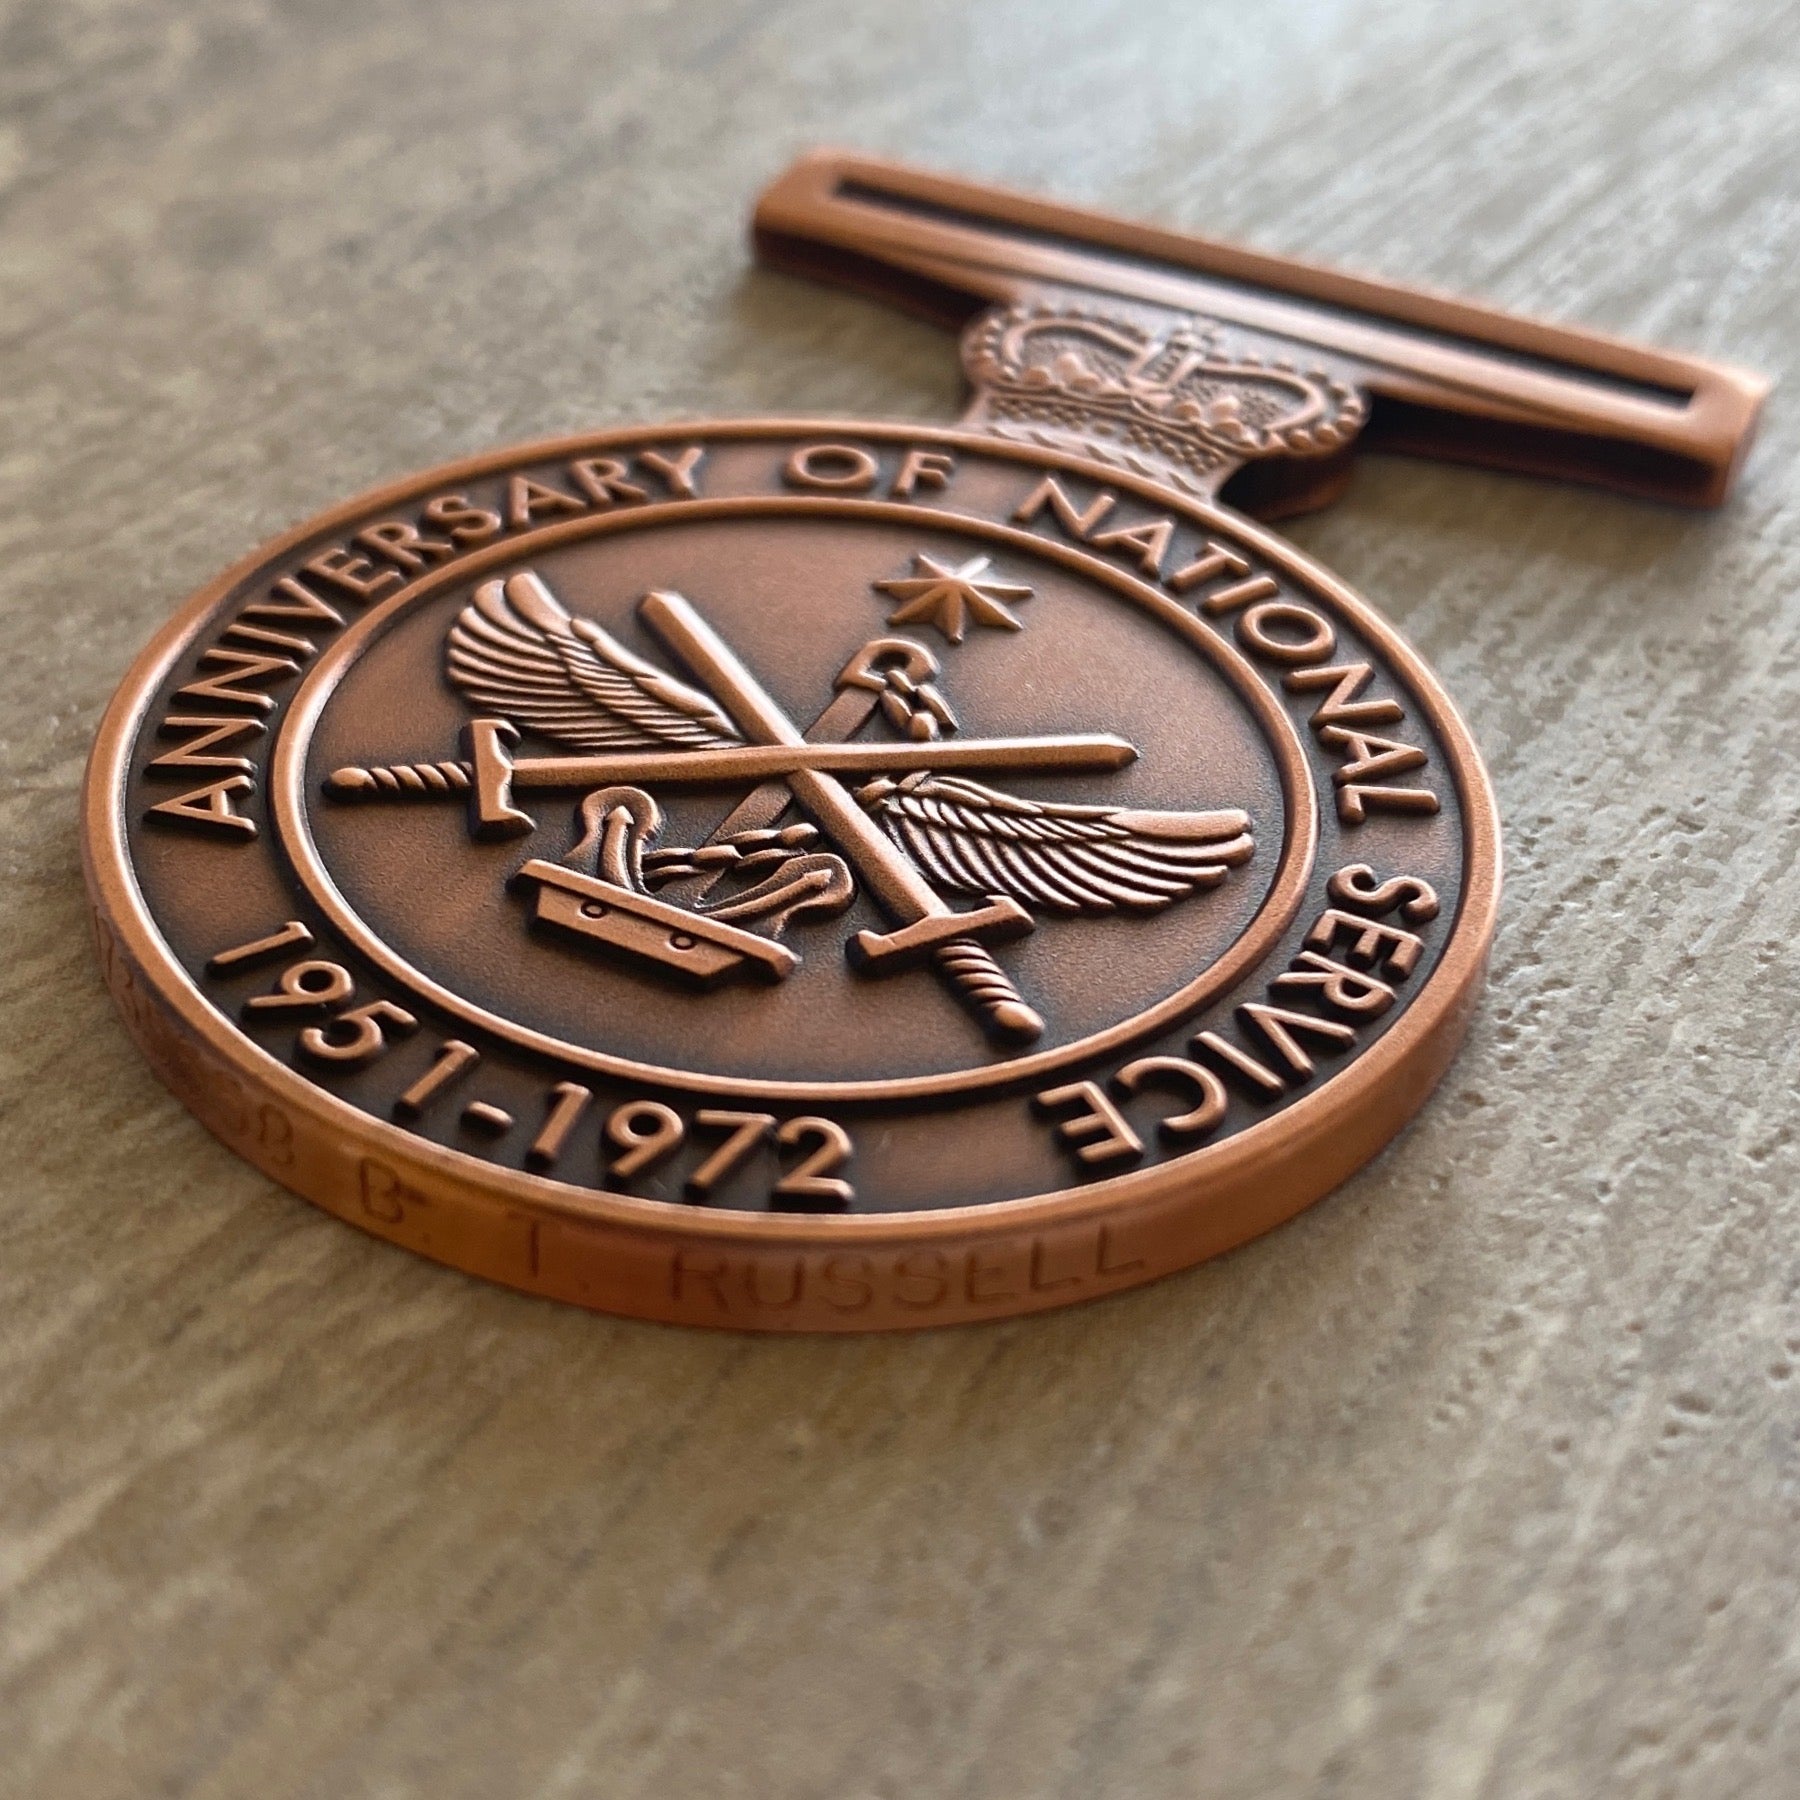 Engraving - Foxhole Medals